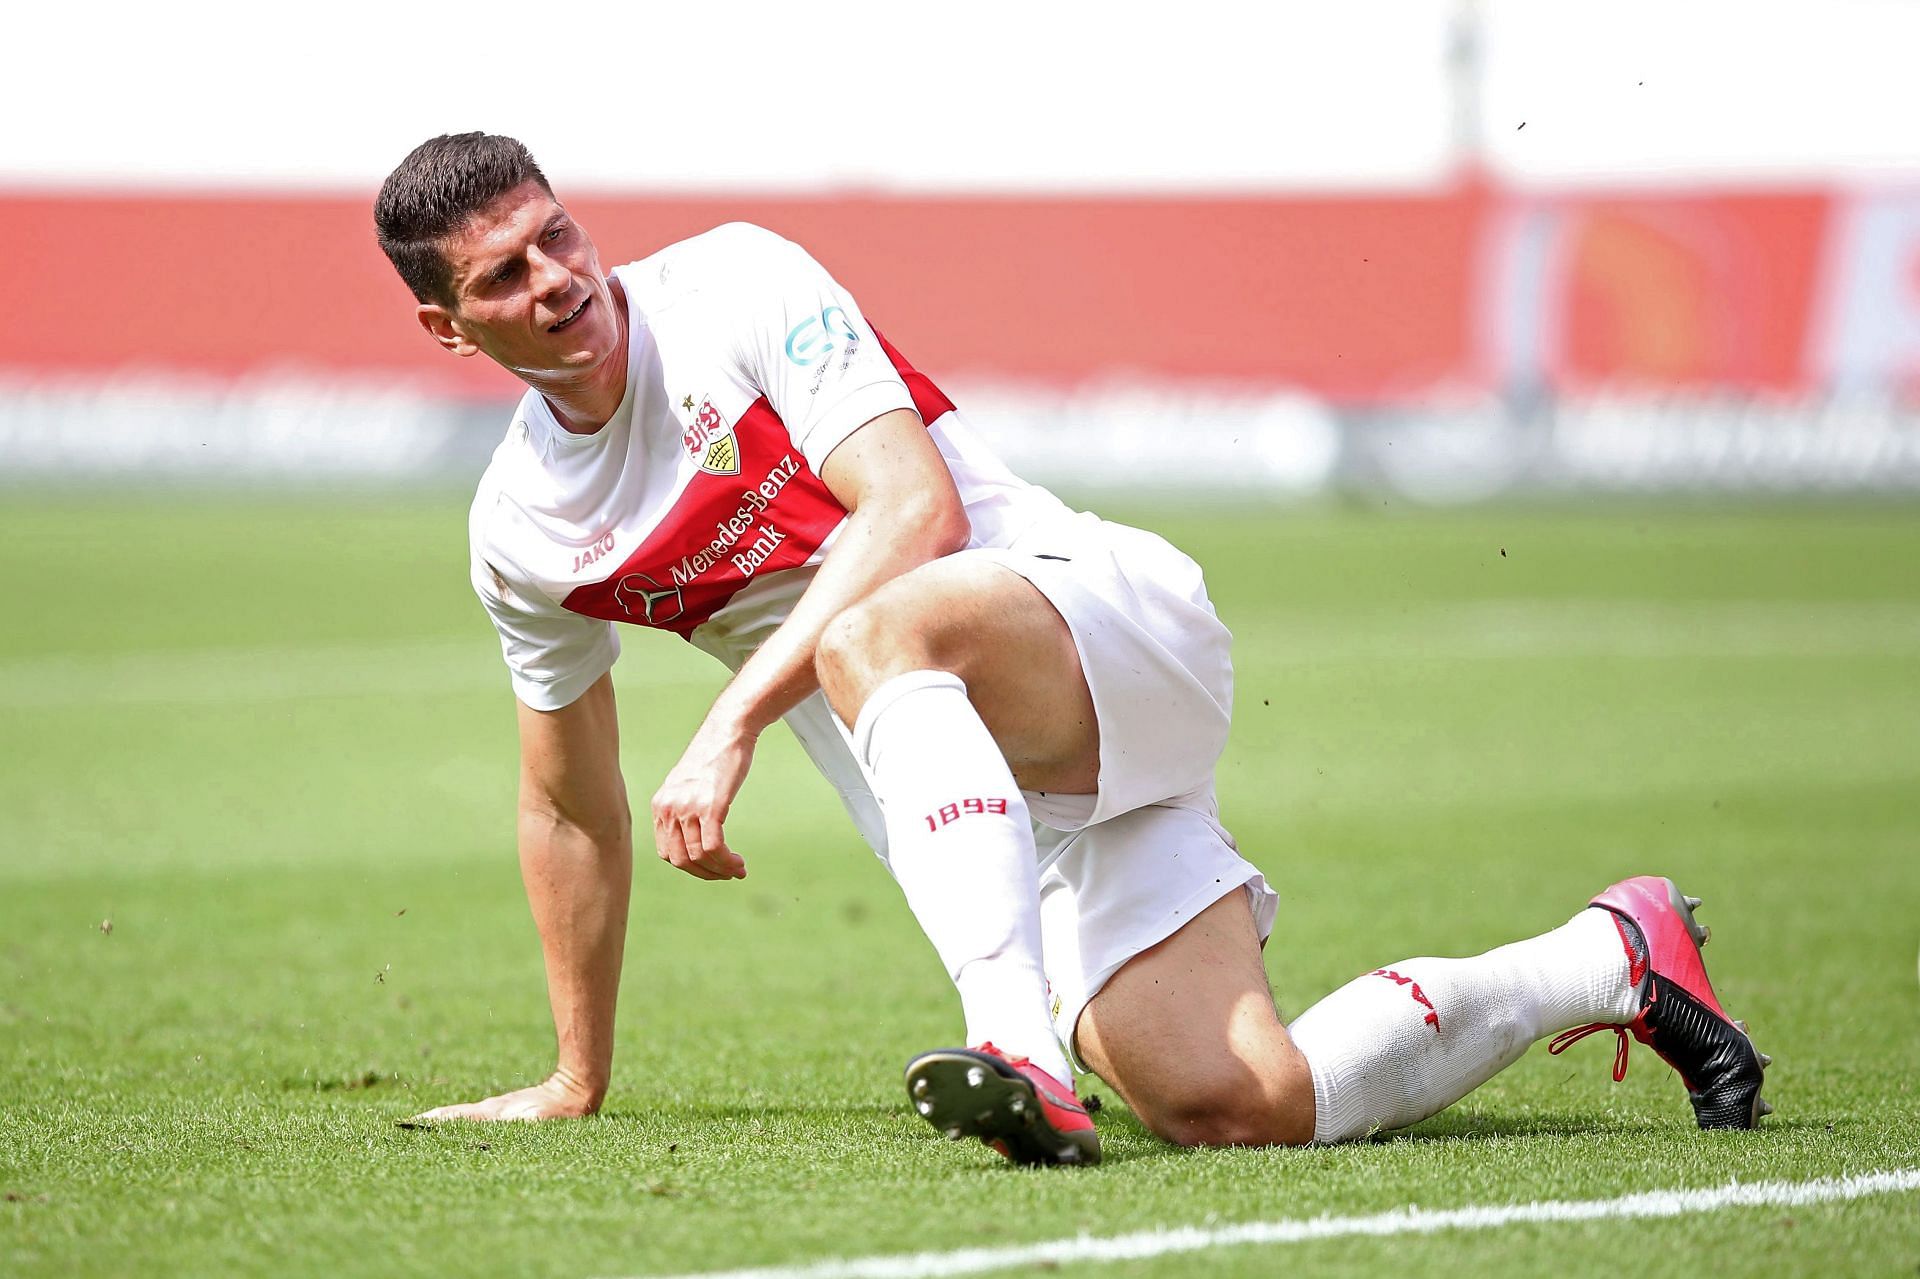 Mario Gomez reacts during a match for VFB Stuttgart.